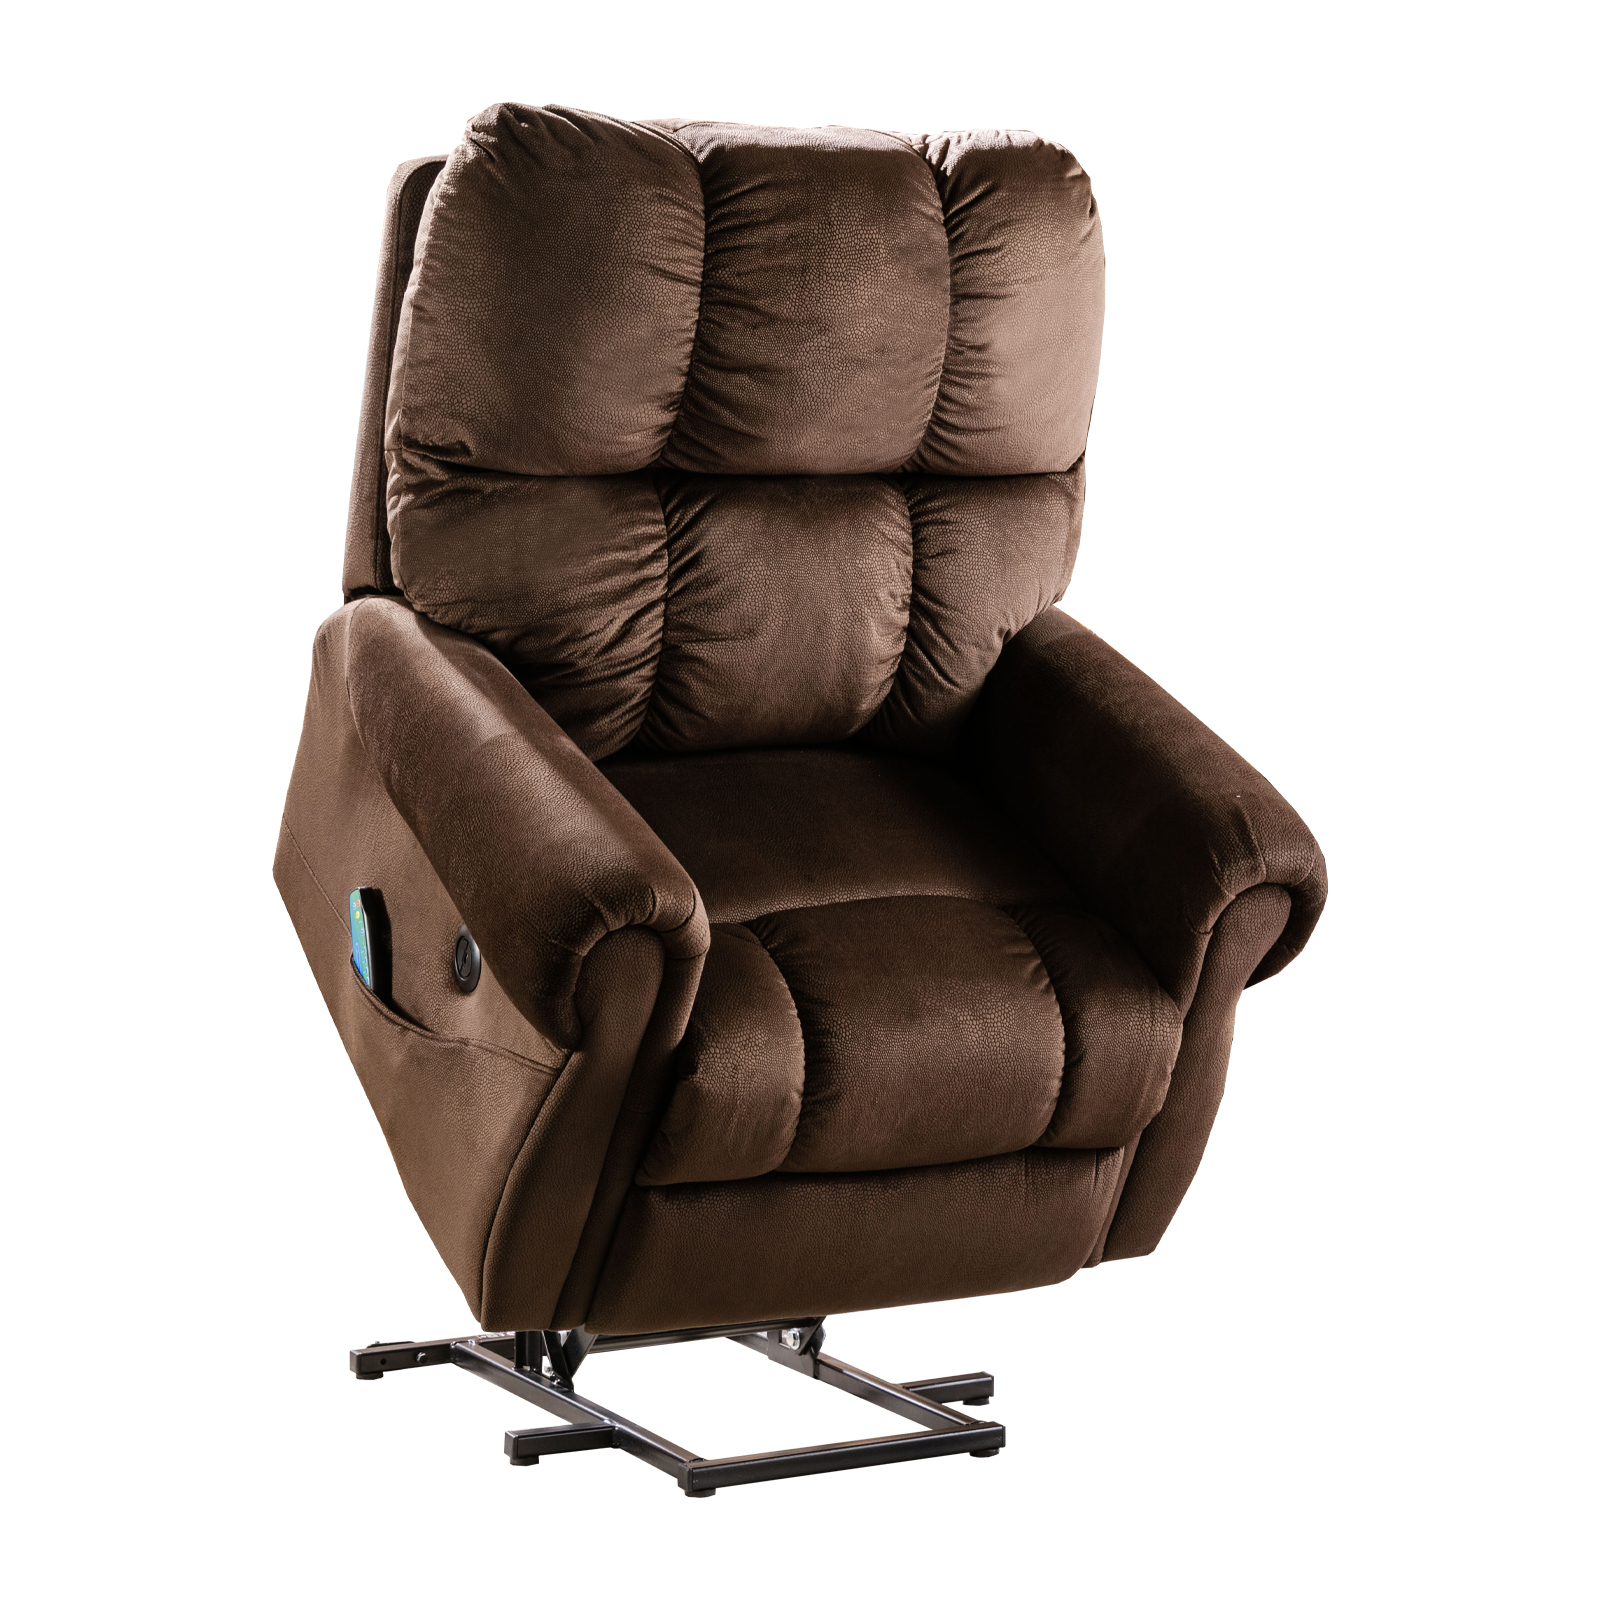 Electric lift recliner with heat therapy and massage, suitable for the elderly, heavy recliner, with modern padded arms and back, chocolate color-Boyel Living